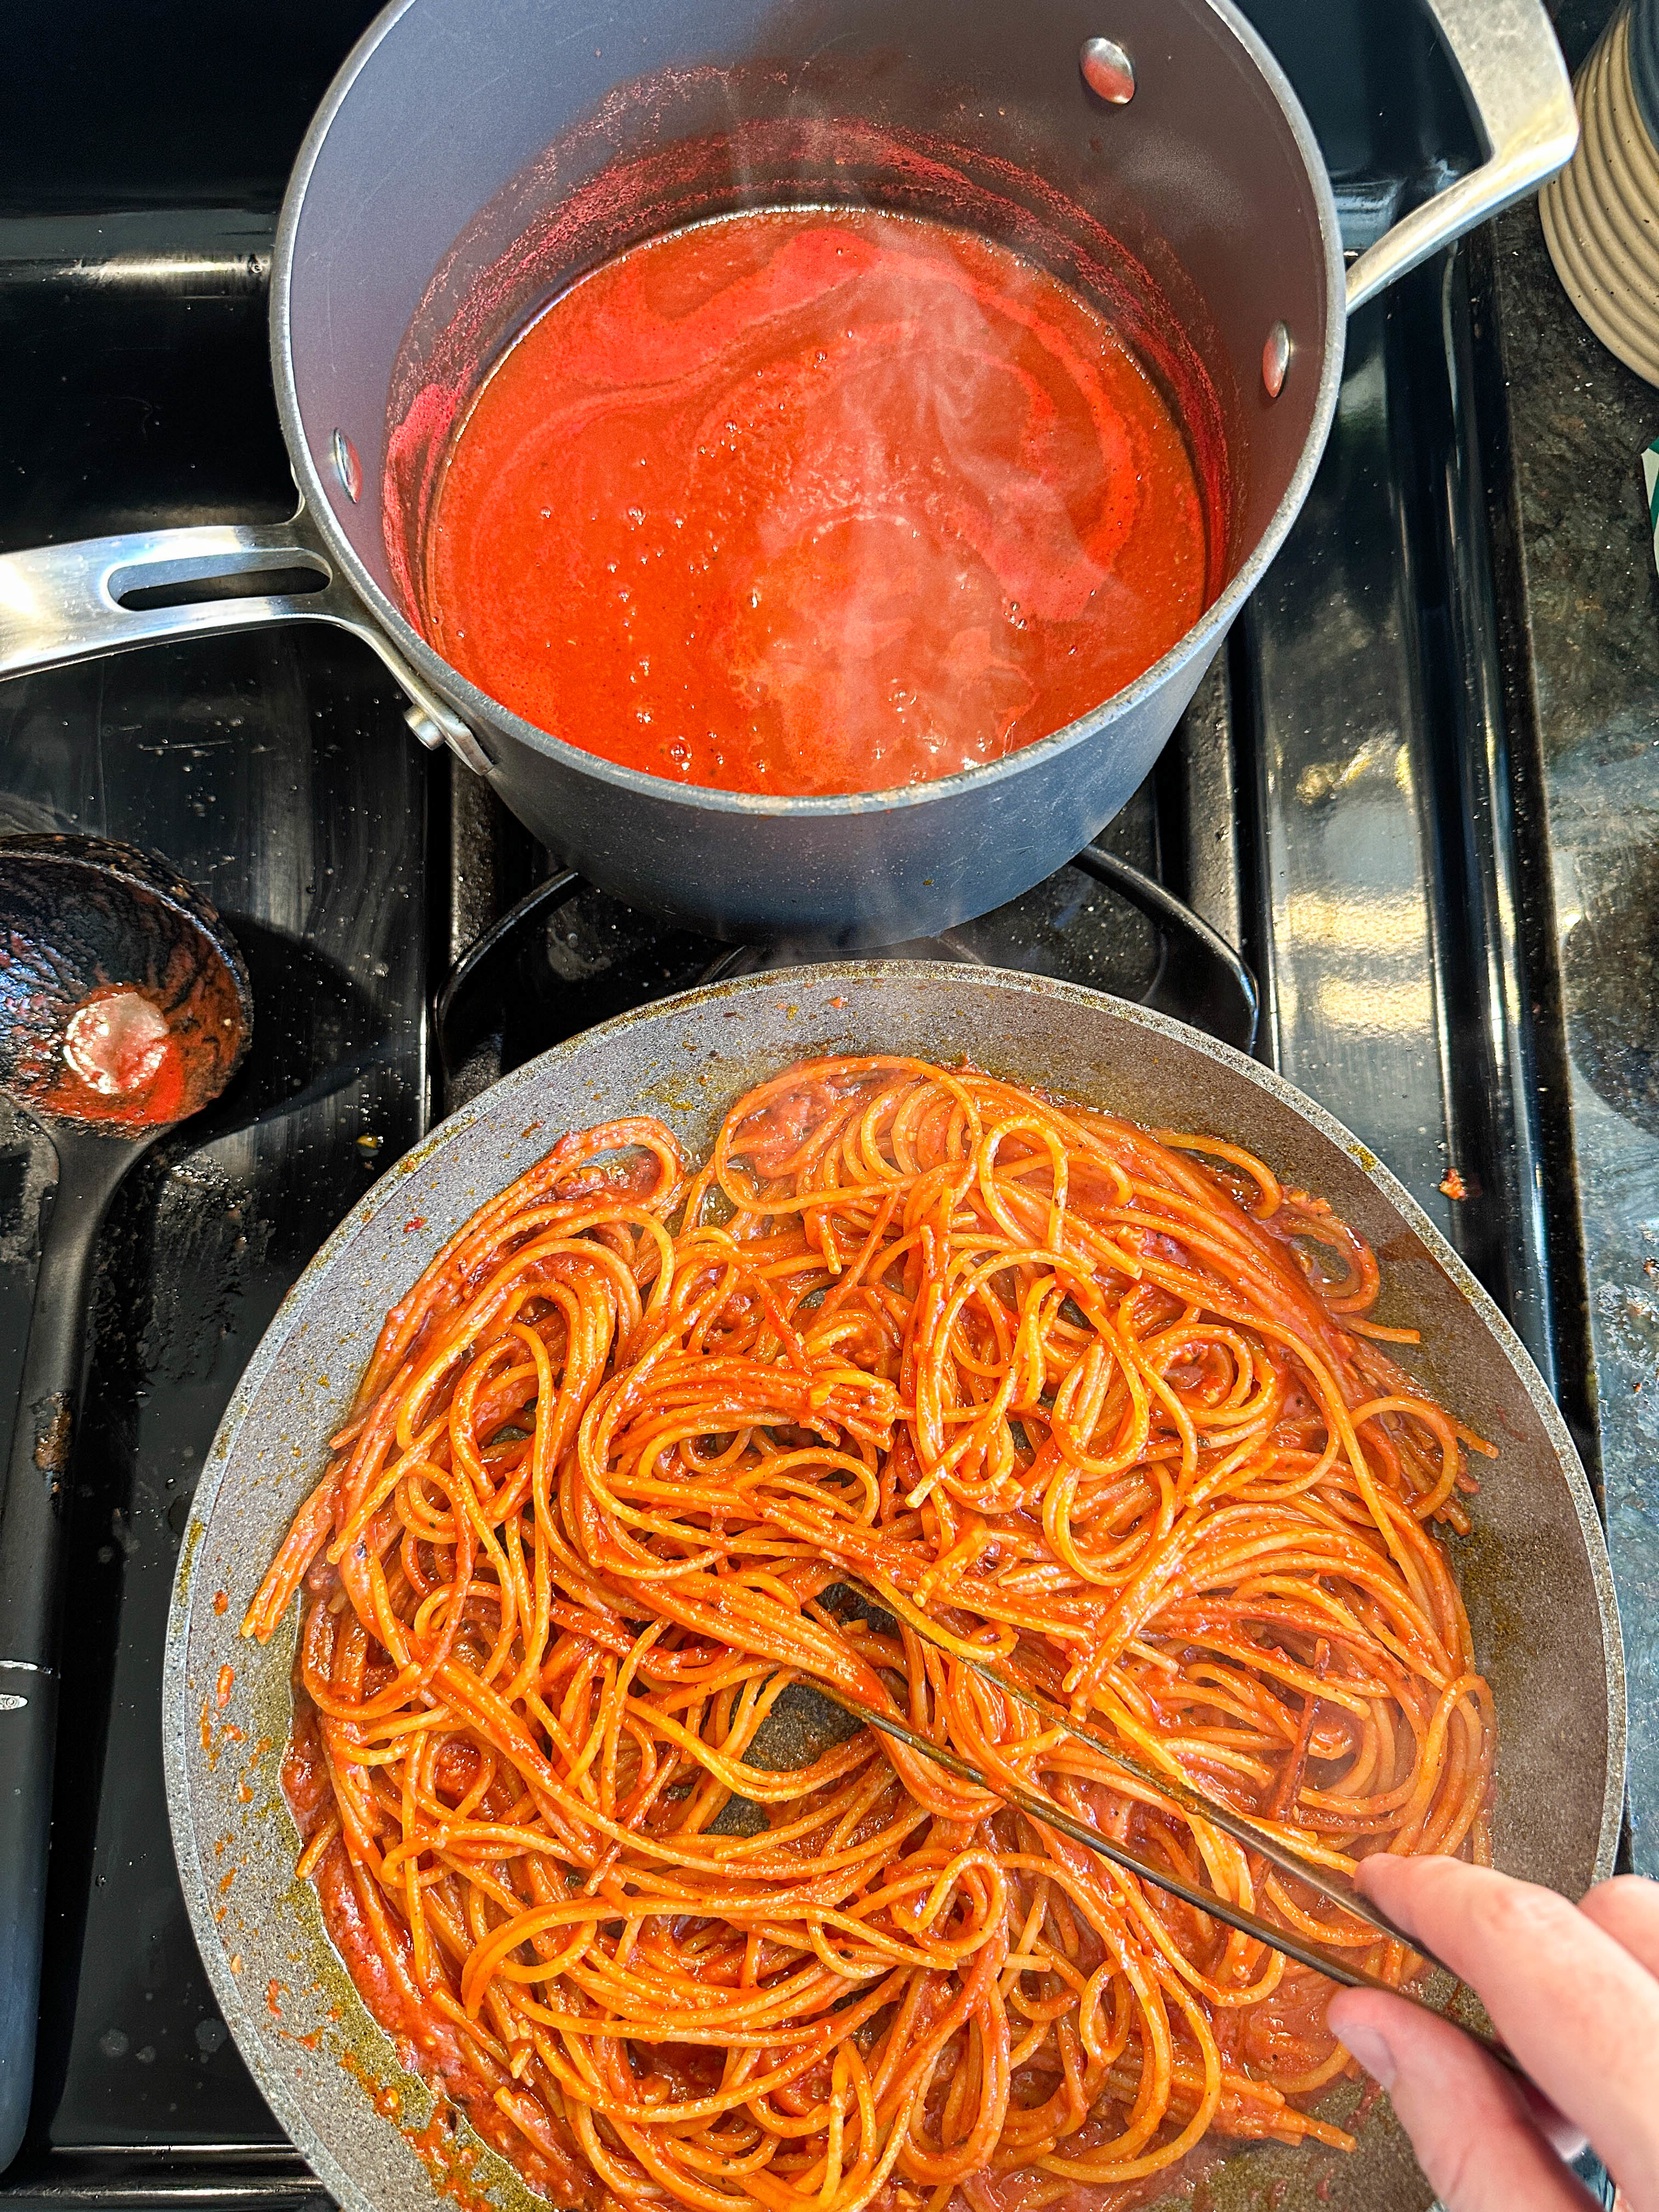 A person stirring spaghetti with tomato sauce in a pan, next to a pot of sauce boiling over on a stovetop